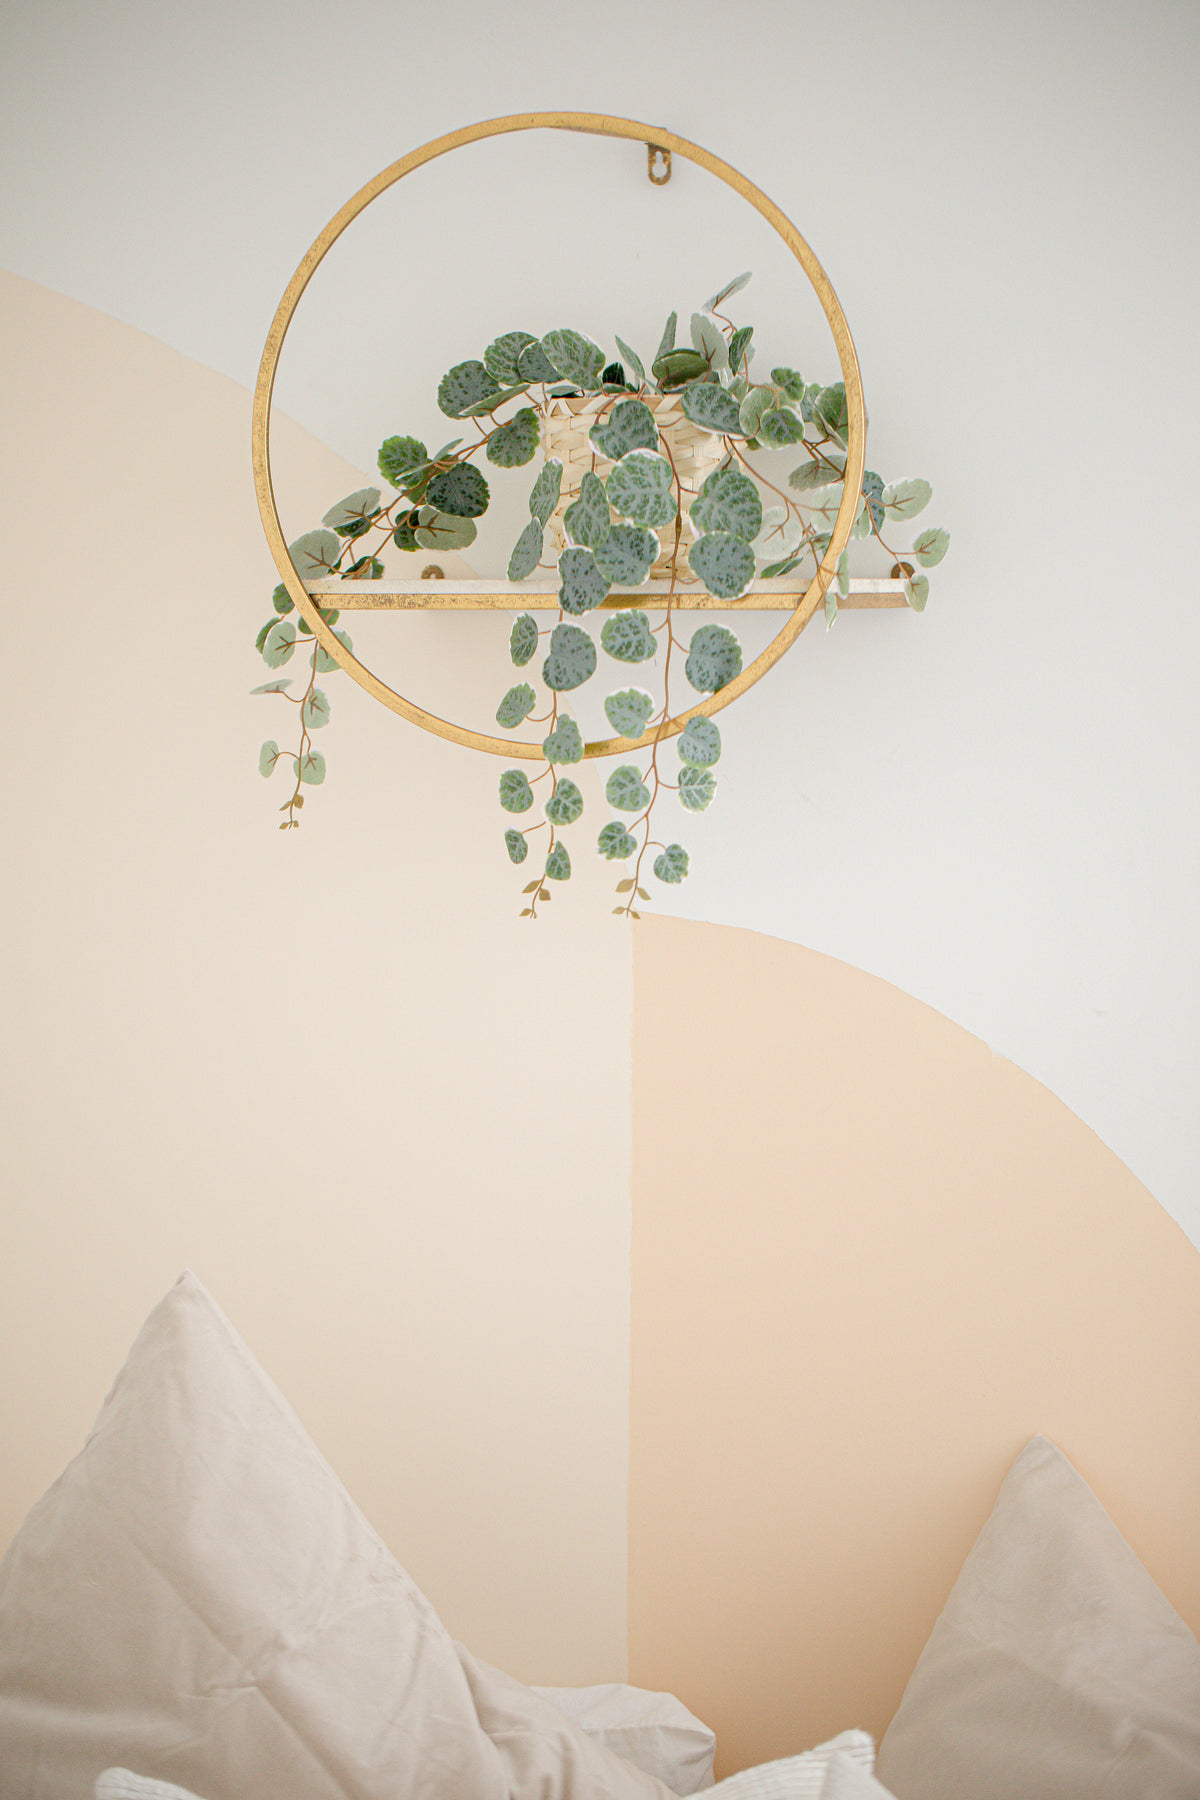 gold circular shelf with a plant on it